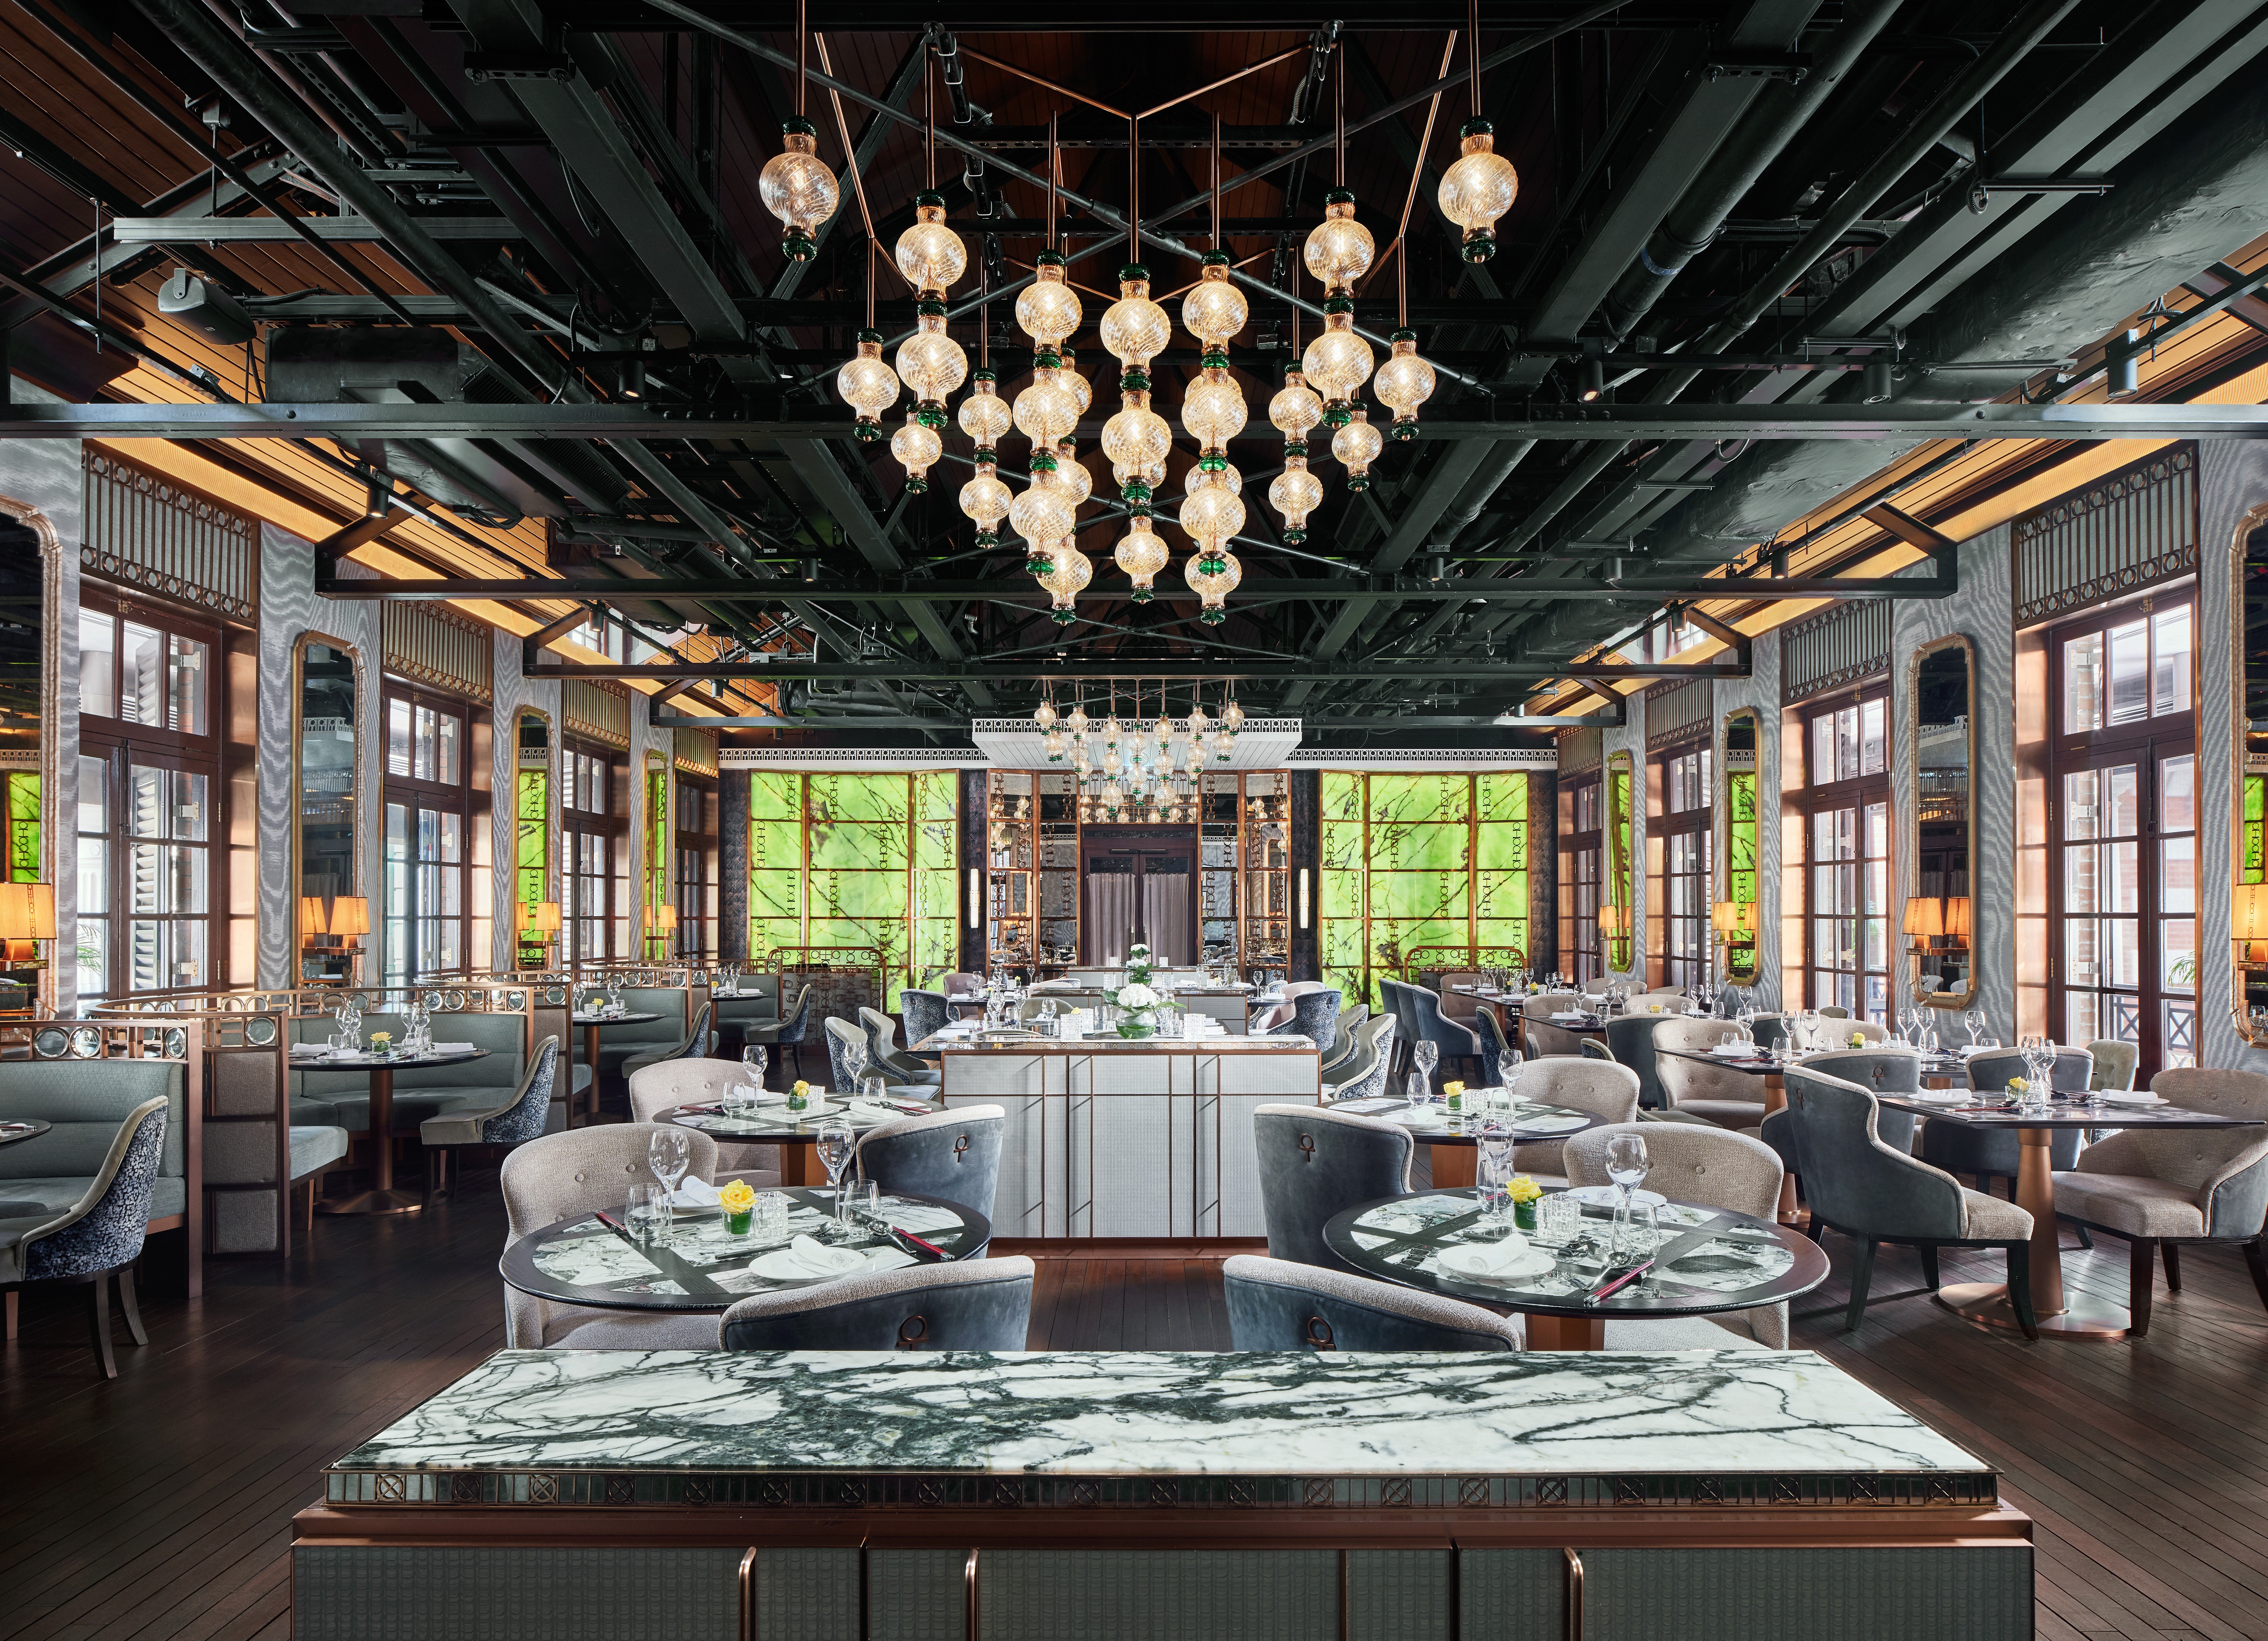 The interior of the restaurant Statement at Tai Kwun Centre for Culture and Arts – the heritage building once the home of Hong Kong’s Central Police Station – which was designed by luxury Hong Kong design firm AB Concept.